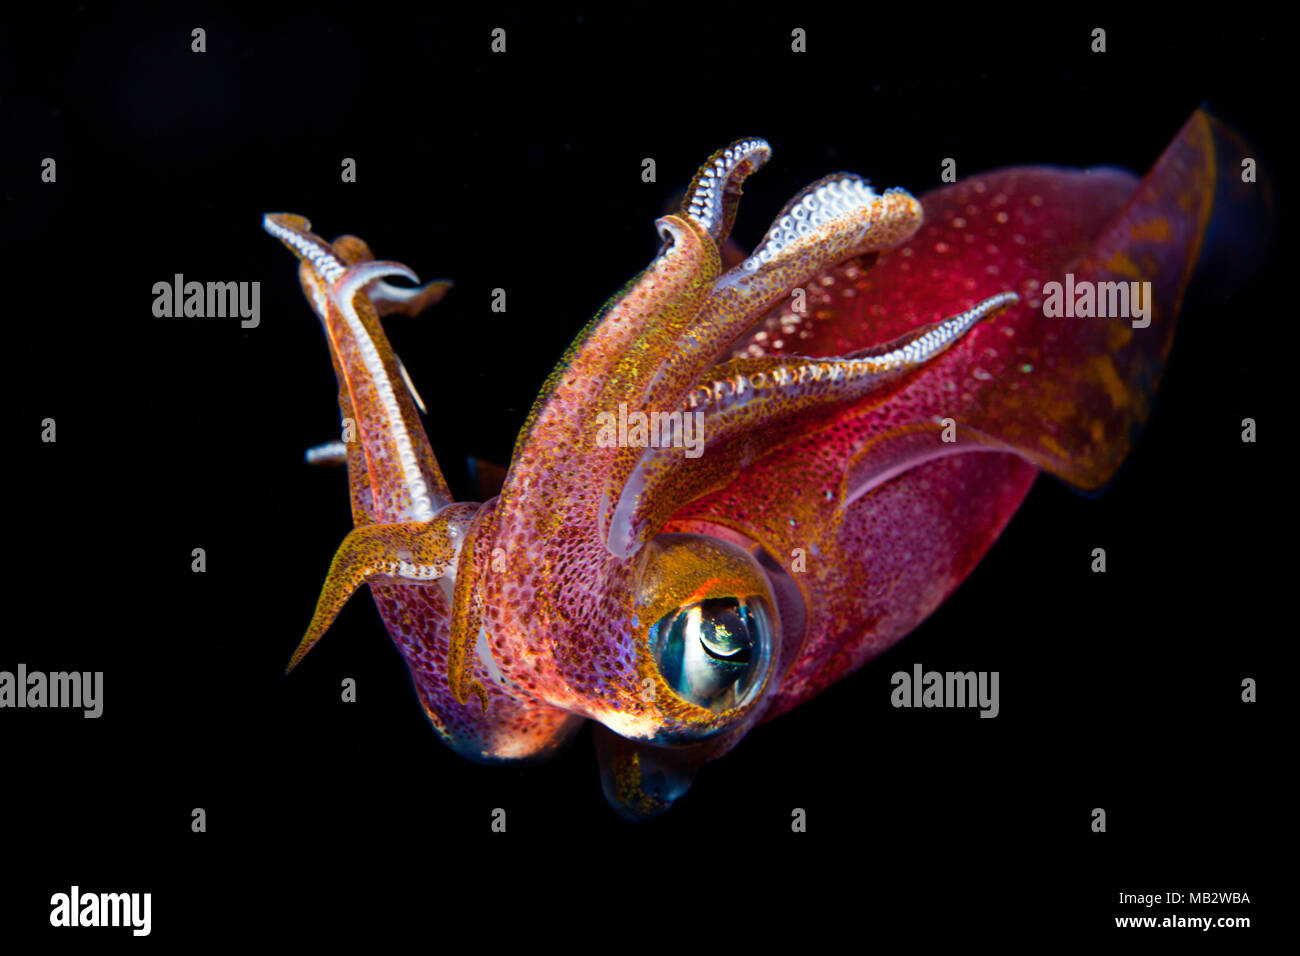 The male oval squid, Sepioteuthis lessoniana, can reach 14 inches in length.  Hawaii. Stock Photo